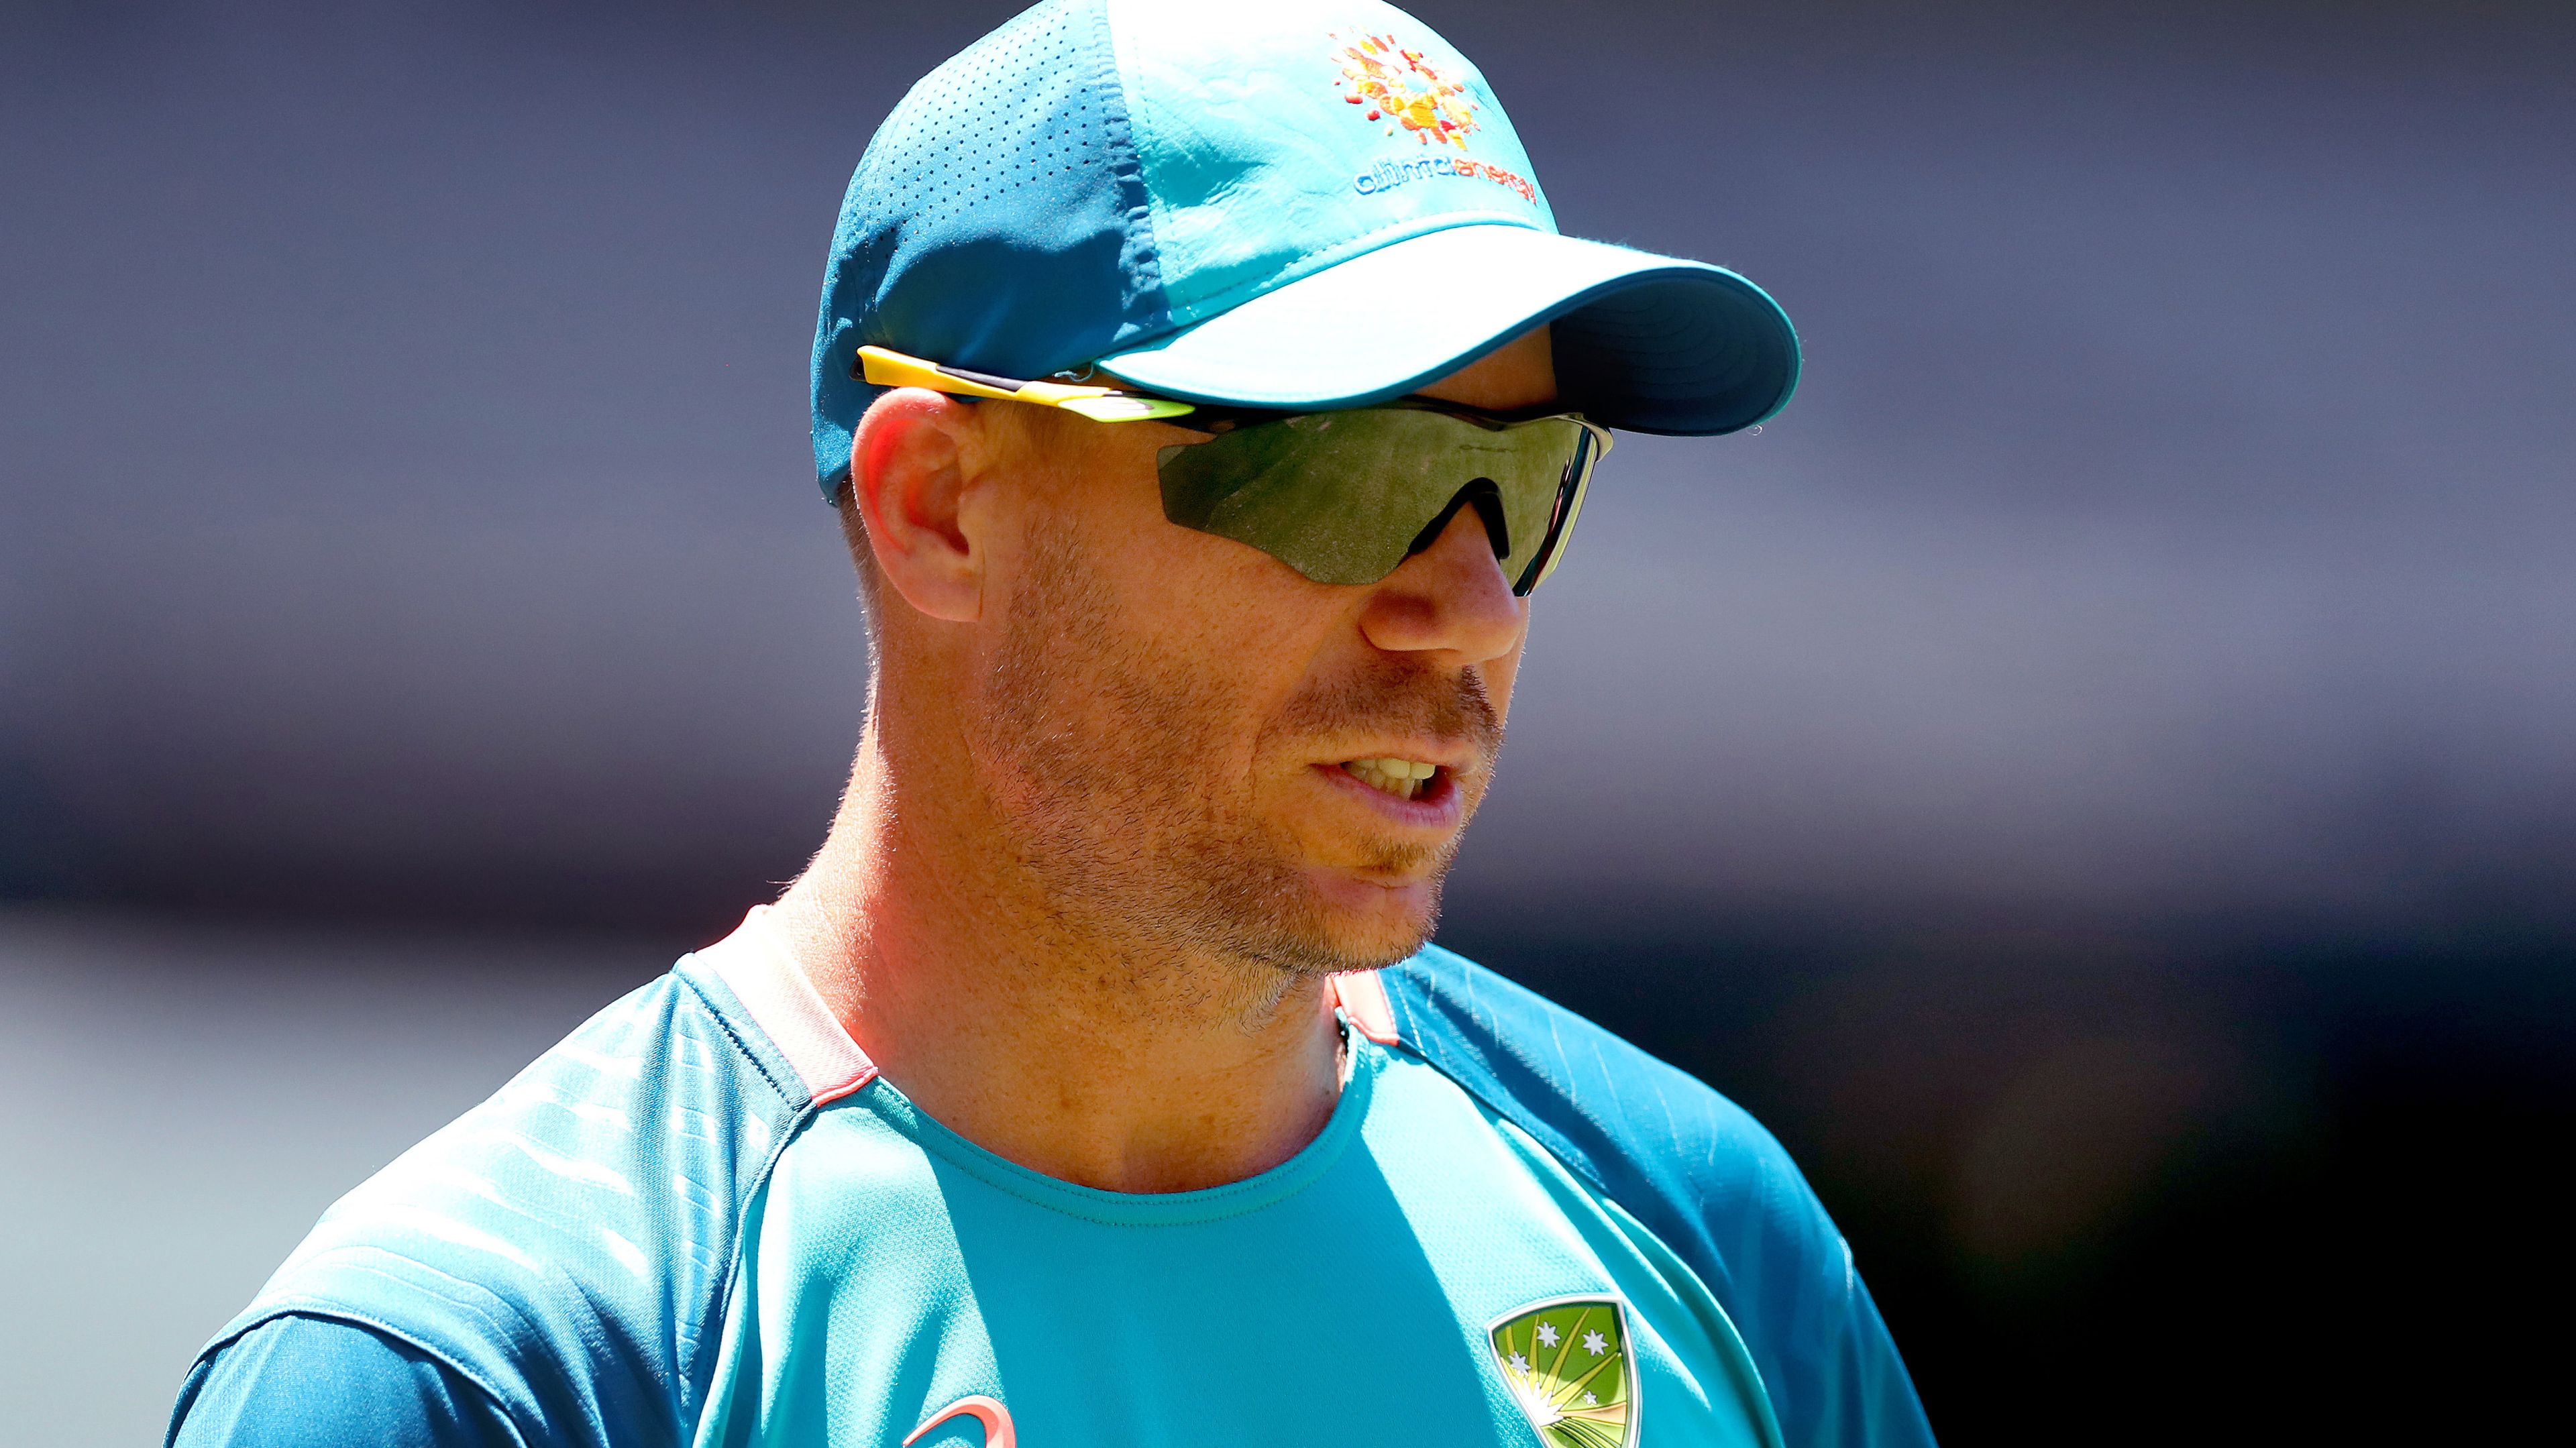 David Warner arrives speaks to media during an Australian Test squad training session at Melbourne Cricket Ground on December 24, 2022 in Melbourne, Australia. (Photo by Kelly Defina/Getty Images)